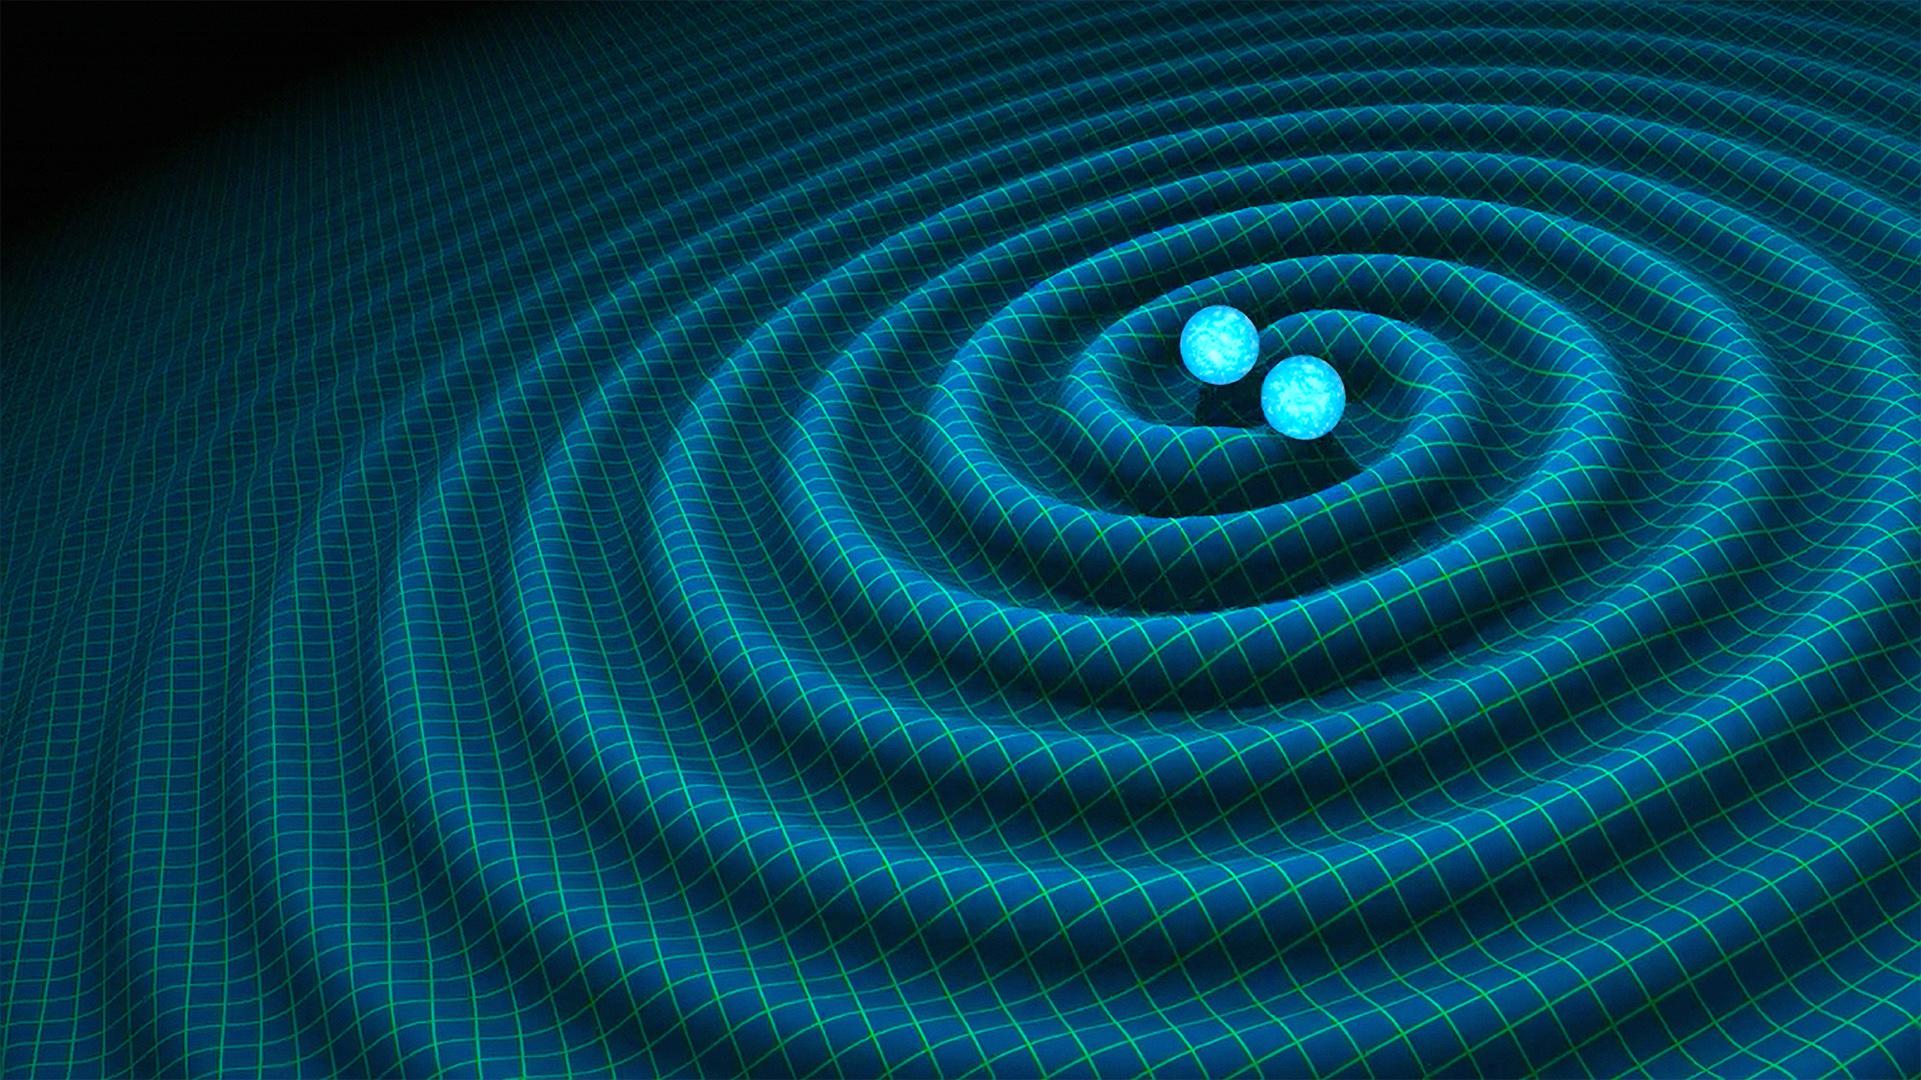 Artist's representation of the generation of gravitational waves from two binary stars.